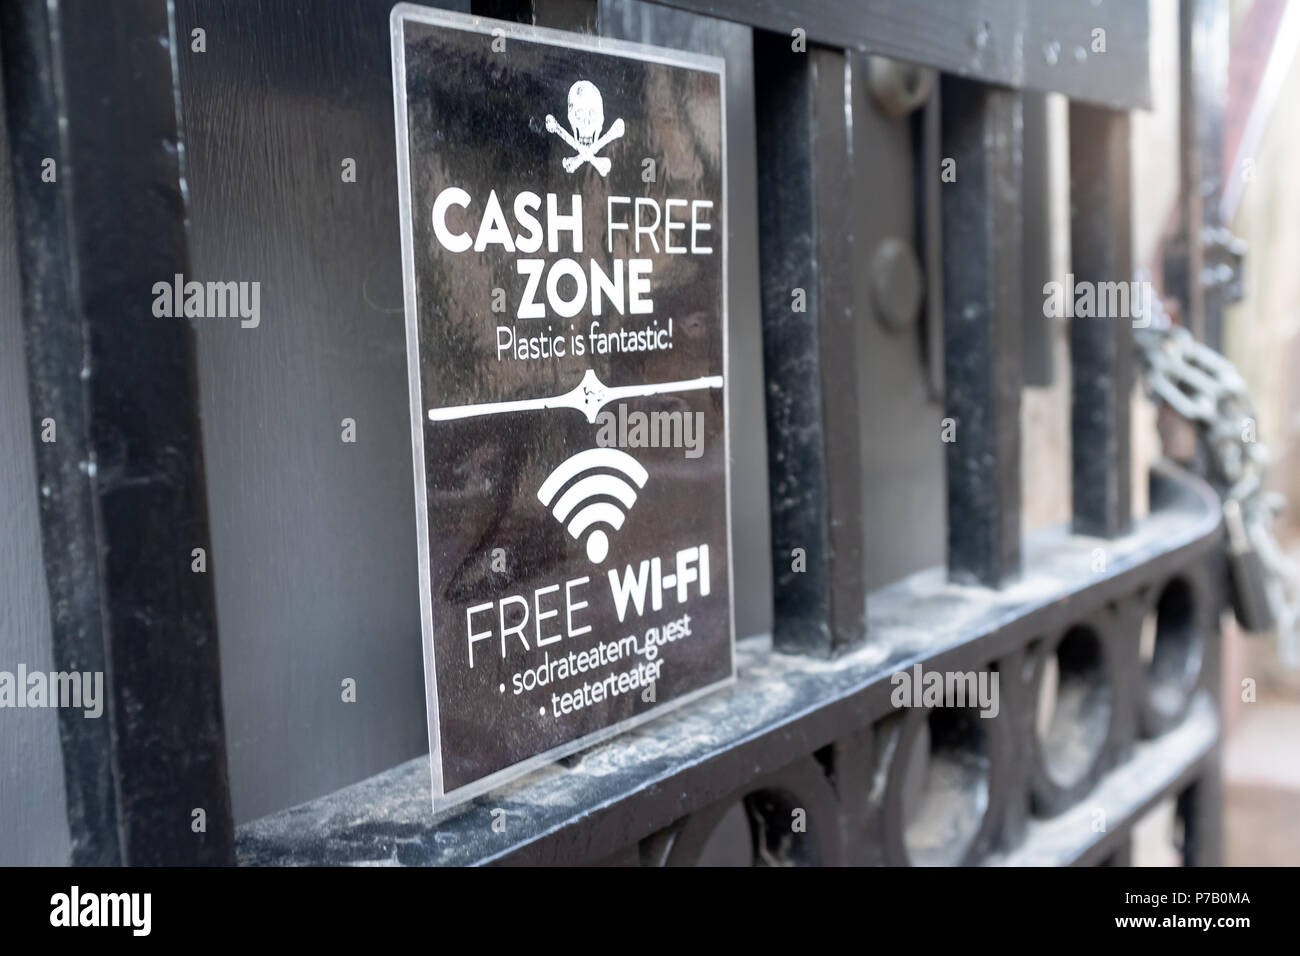 Cash Free Zone and Free Wi Fi sign, Sodermalm, Stockholm, Sweden Stock Photo